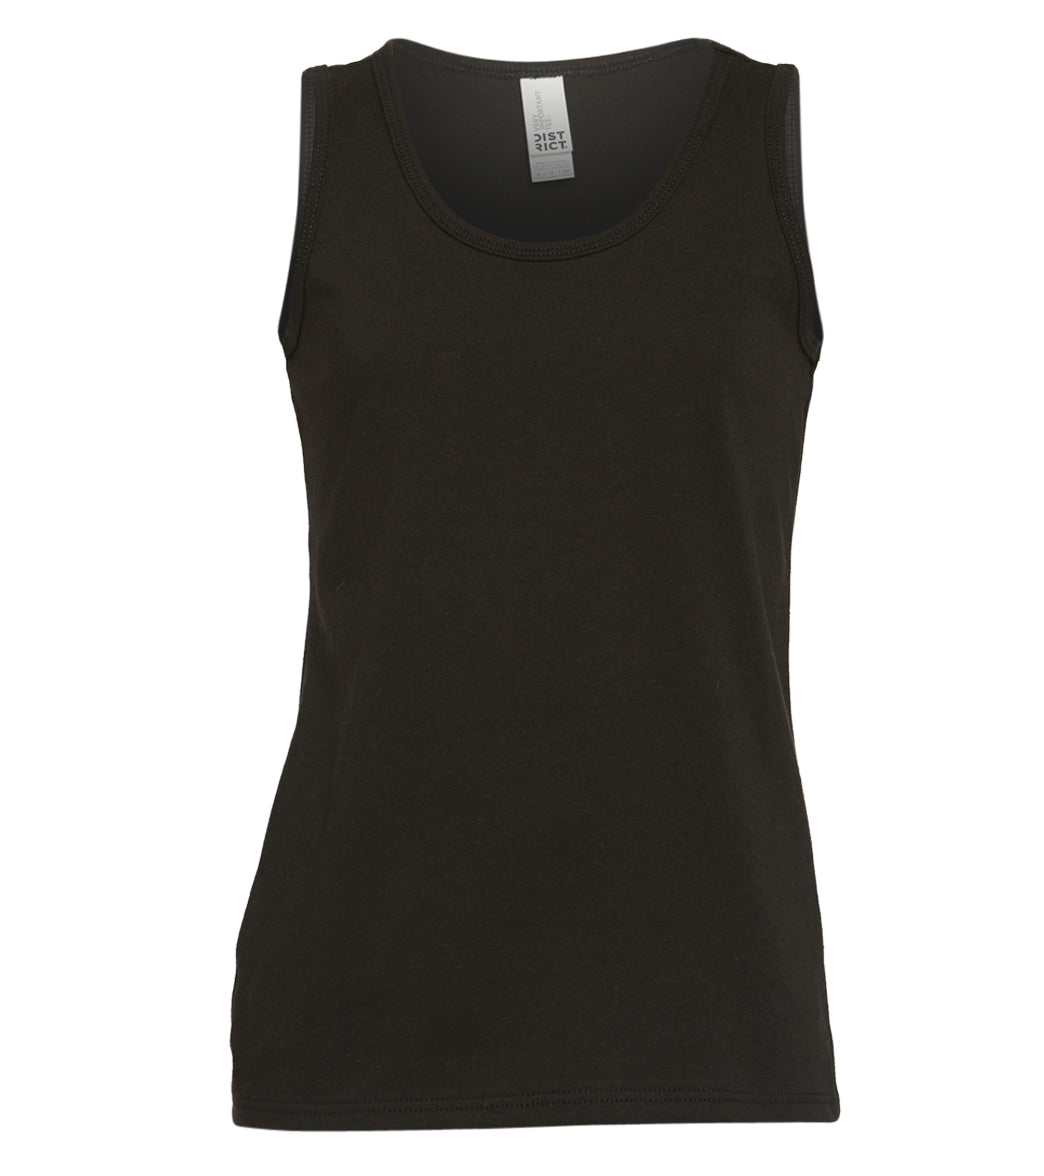 Girl's Ribbed Neck Tank Top - Black Large Cotton - Swimoutlet.com